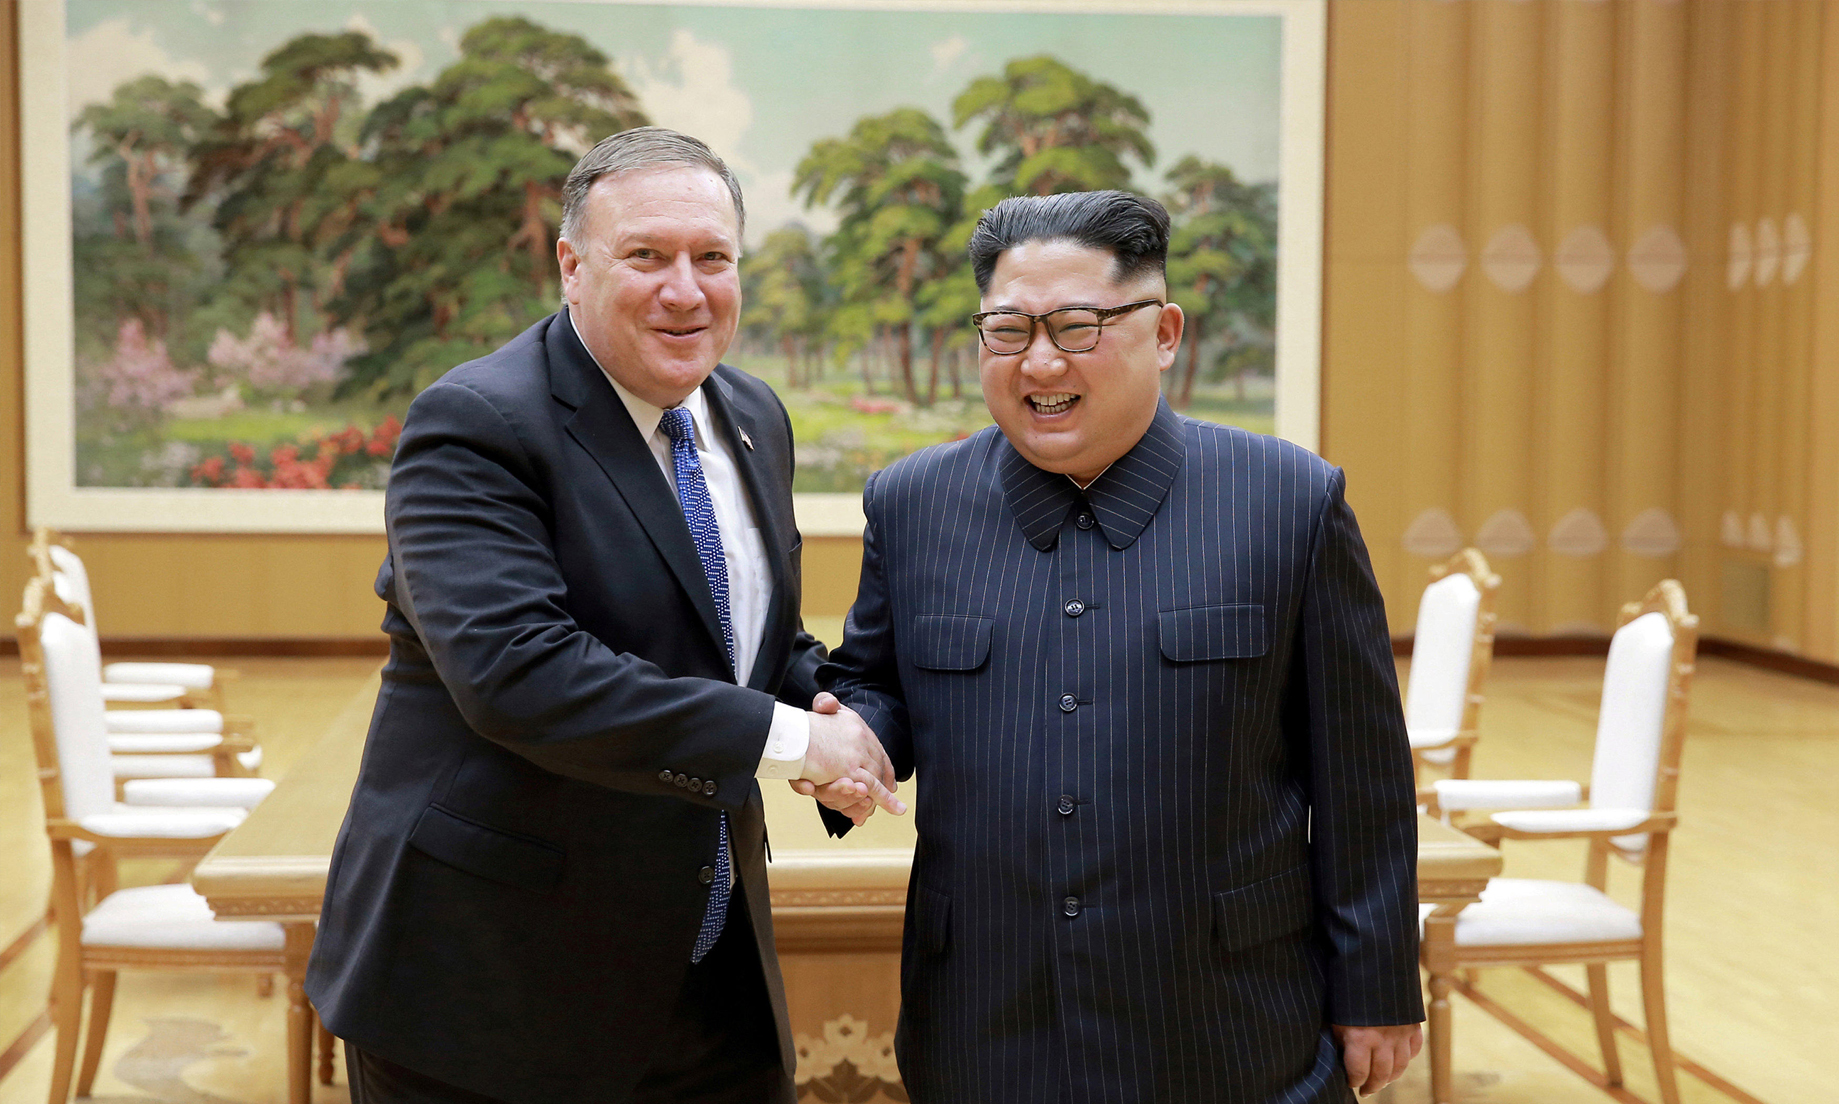 Pompeo optimistic talks with North Korea can resume within weeks